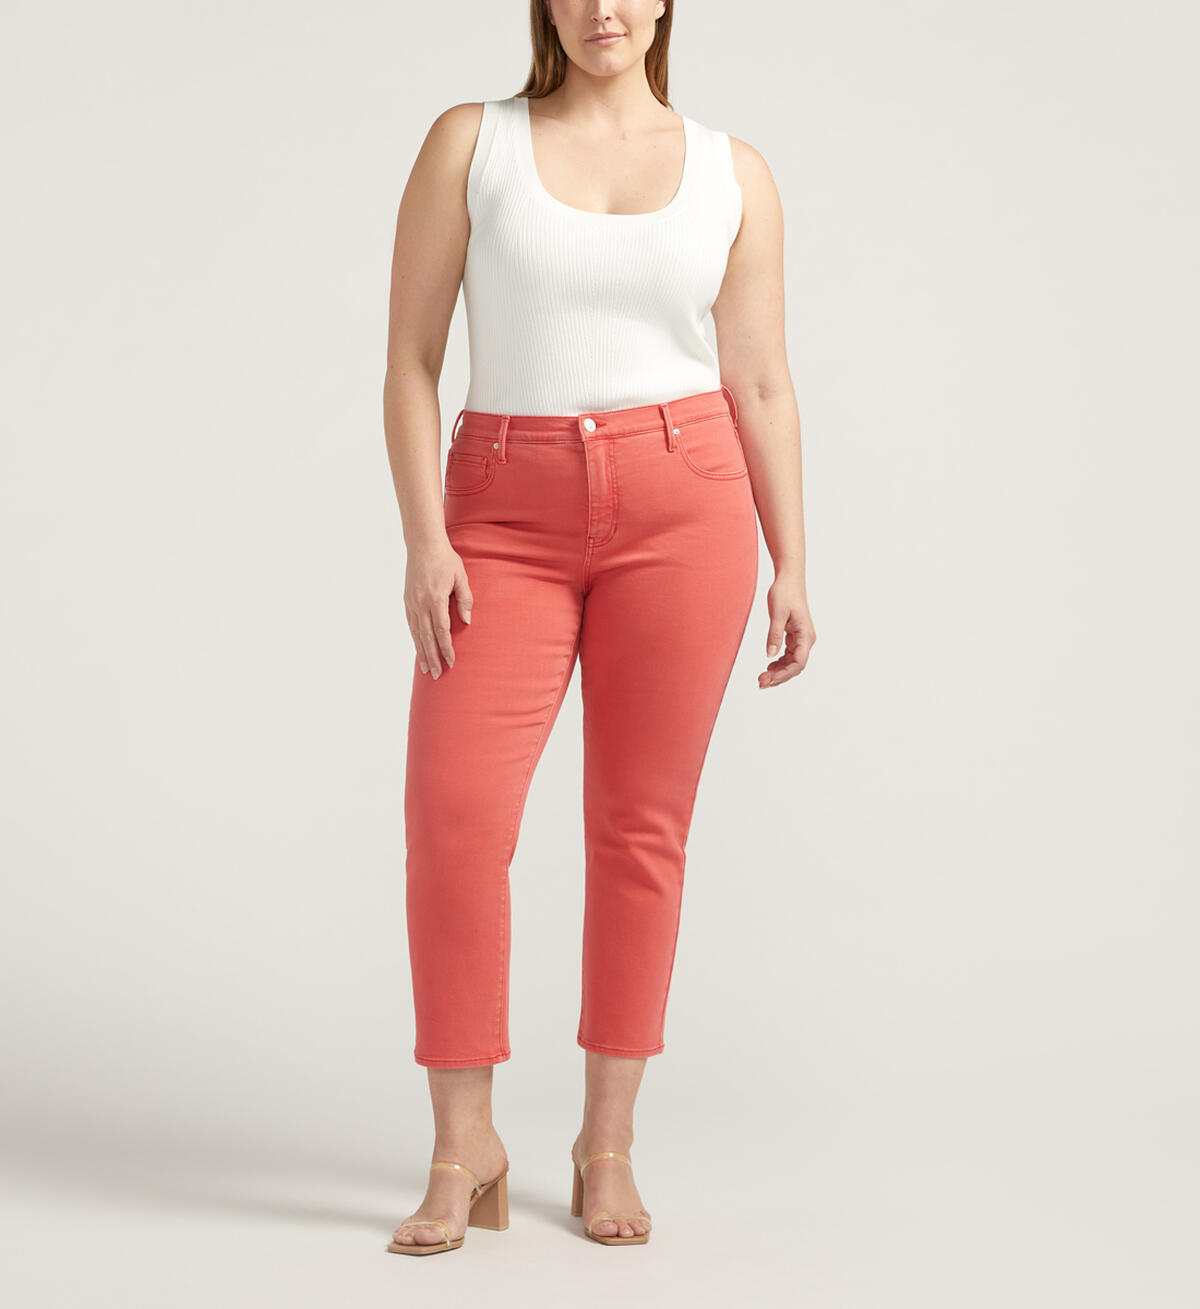 Cassie Mid Rise Cropped Pants Plus Size, , hi-res image number 0